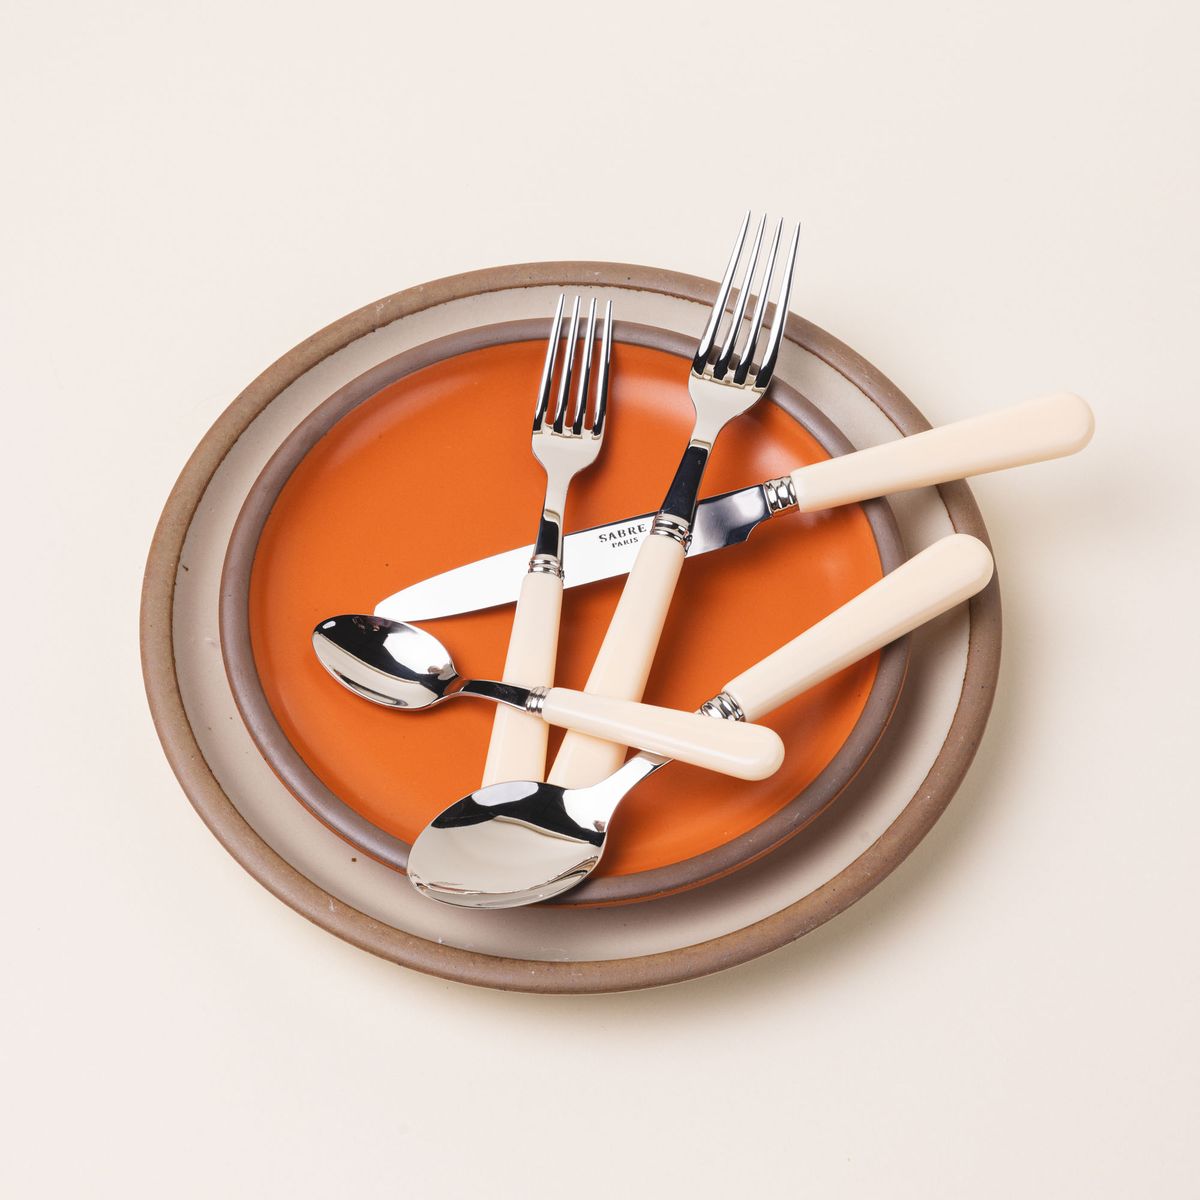 A five piece flatware set with shiny utensils and matte cream handles sits on a bold orange and cream ceramic plates